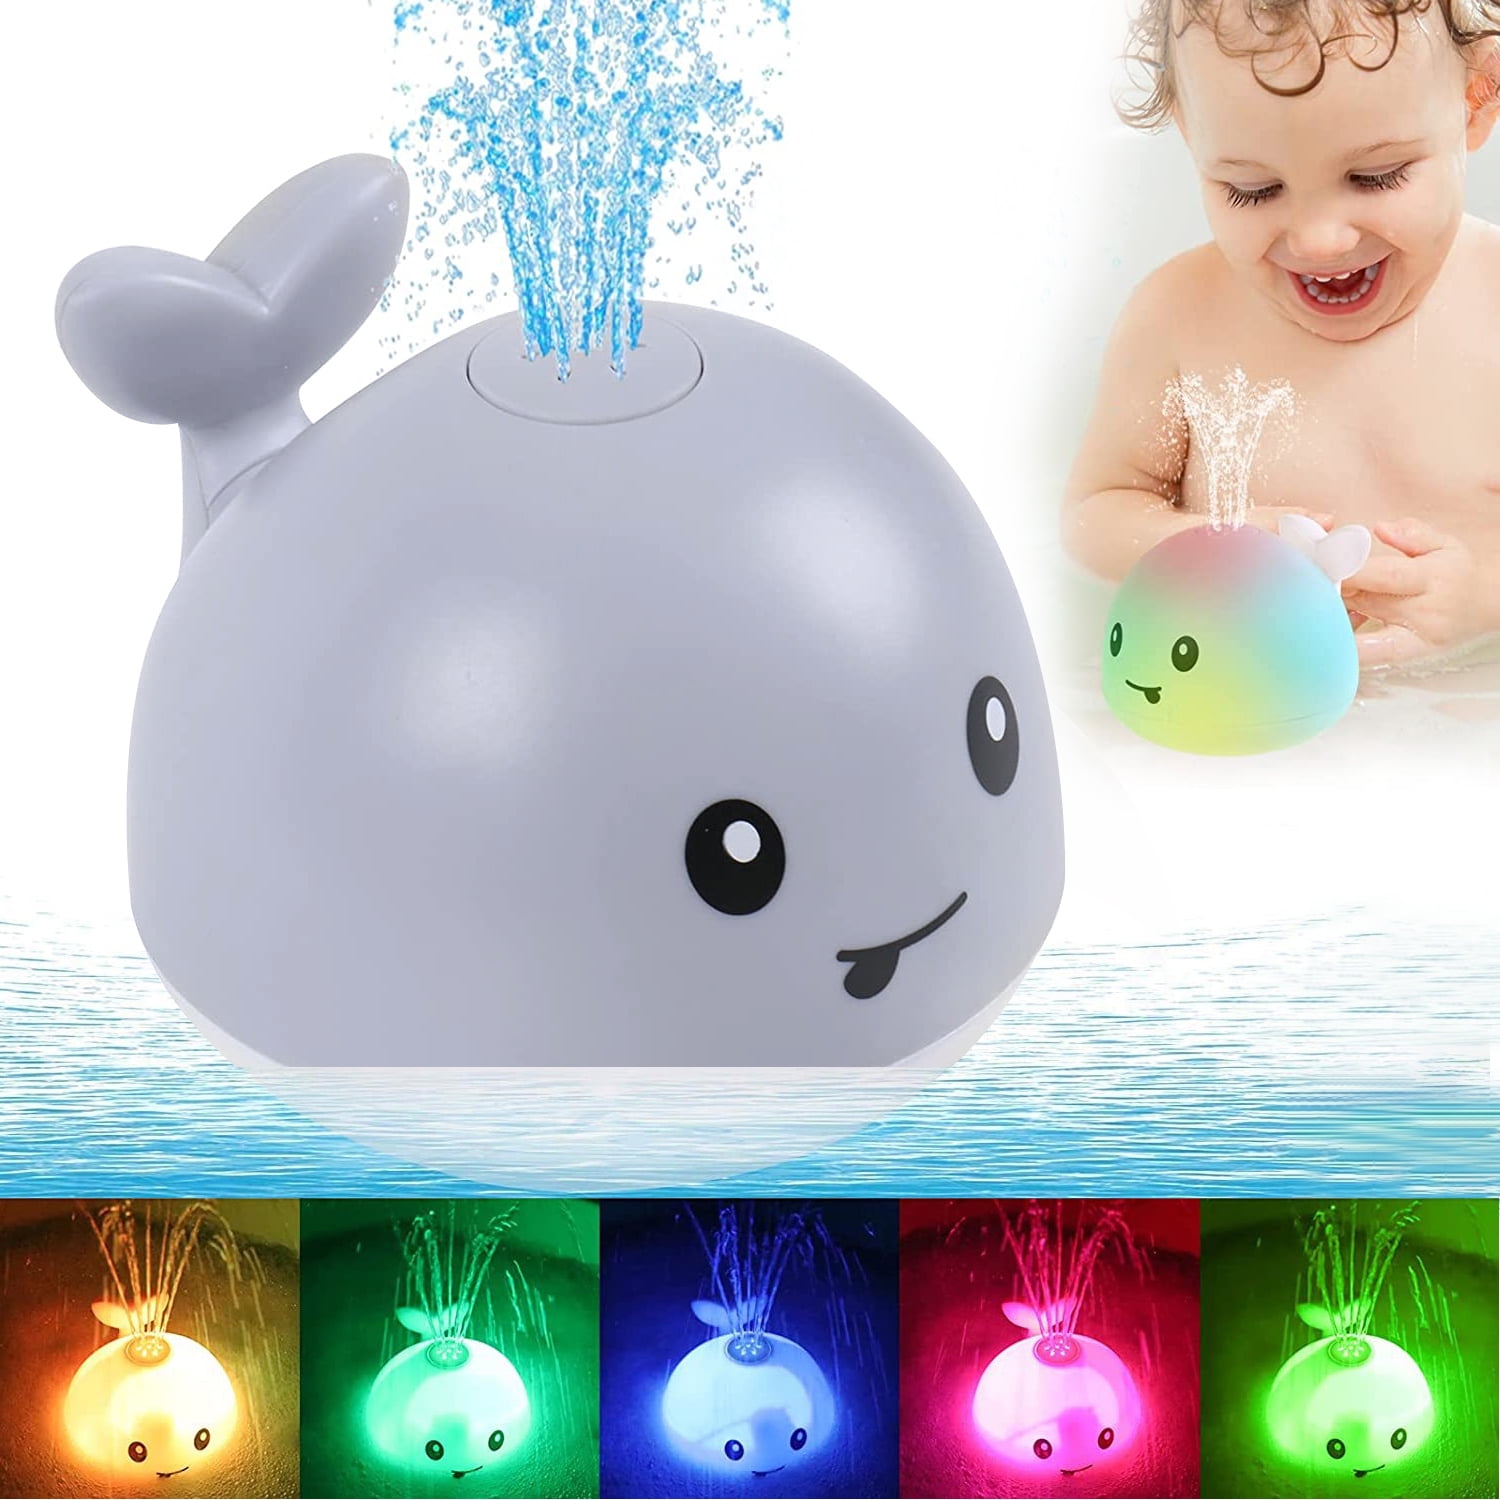 Toys Bath Toys Bathtub Toys for Toddlers Kids Boys Girls in 1 2 3 4 5,Whale Toys Spray Water Light Up Colorful Little Whale Swim Idea Gift 